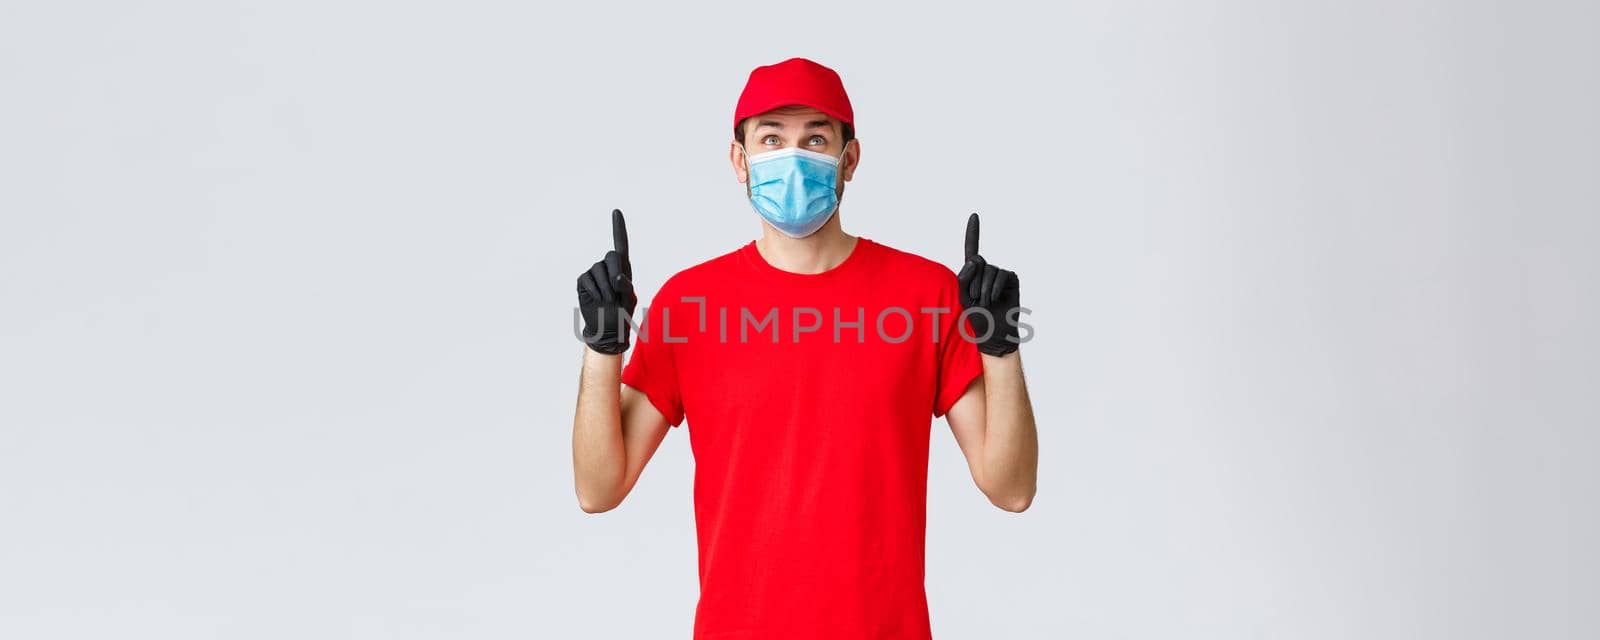 Covid-19, self-quarantine, online shopping and shipping concept. Smiling delivery guy red uniform cap and t-shirt, medical mask with rubber gloves, looking pointing up curious, reading sign or promo by Benzoix